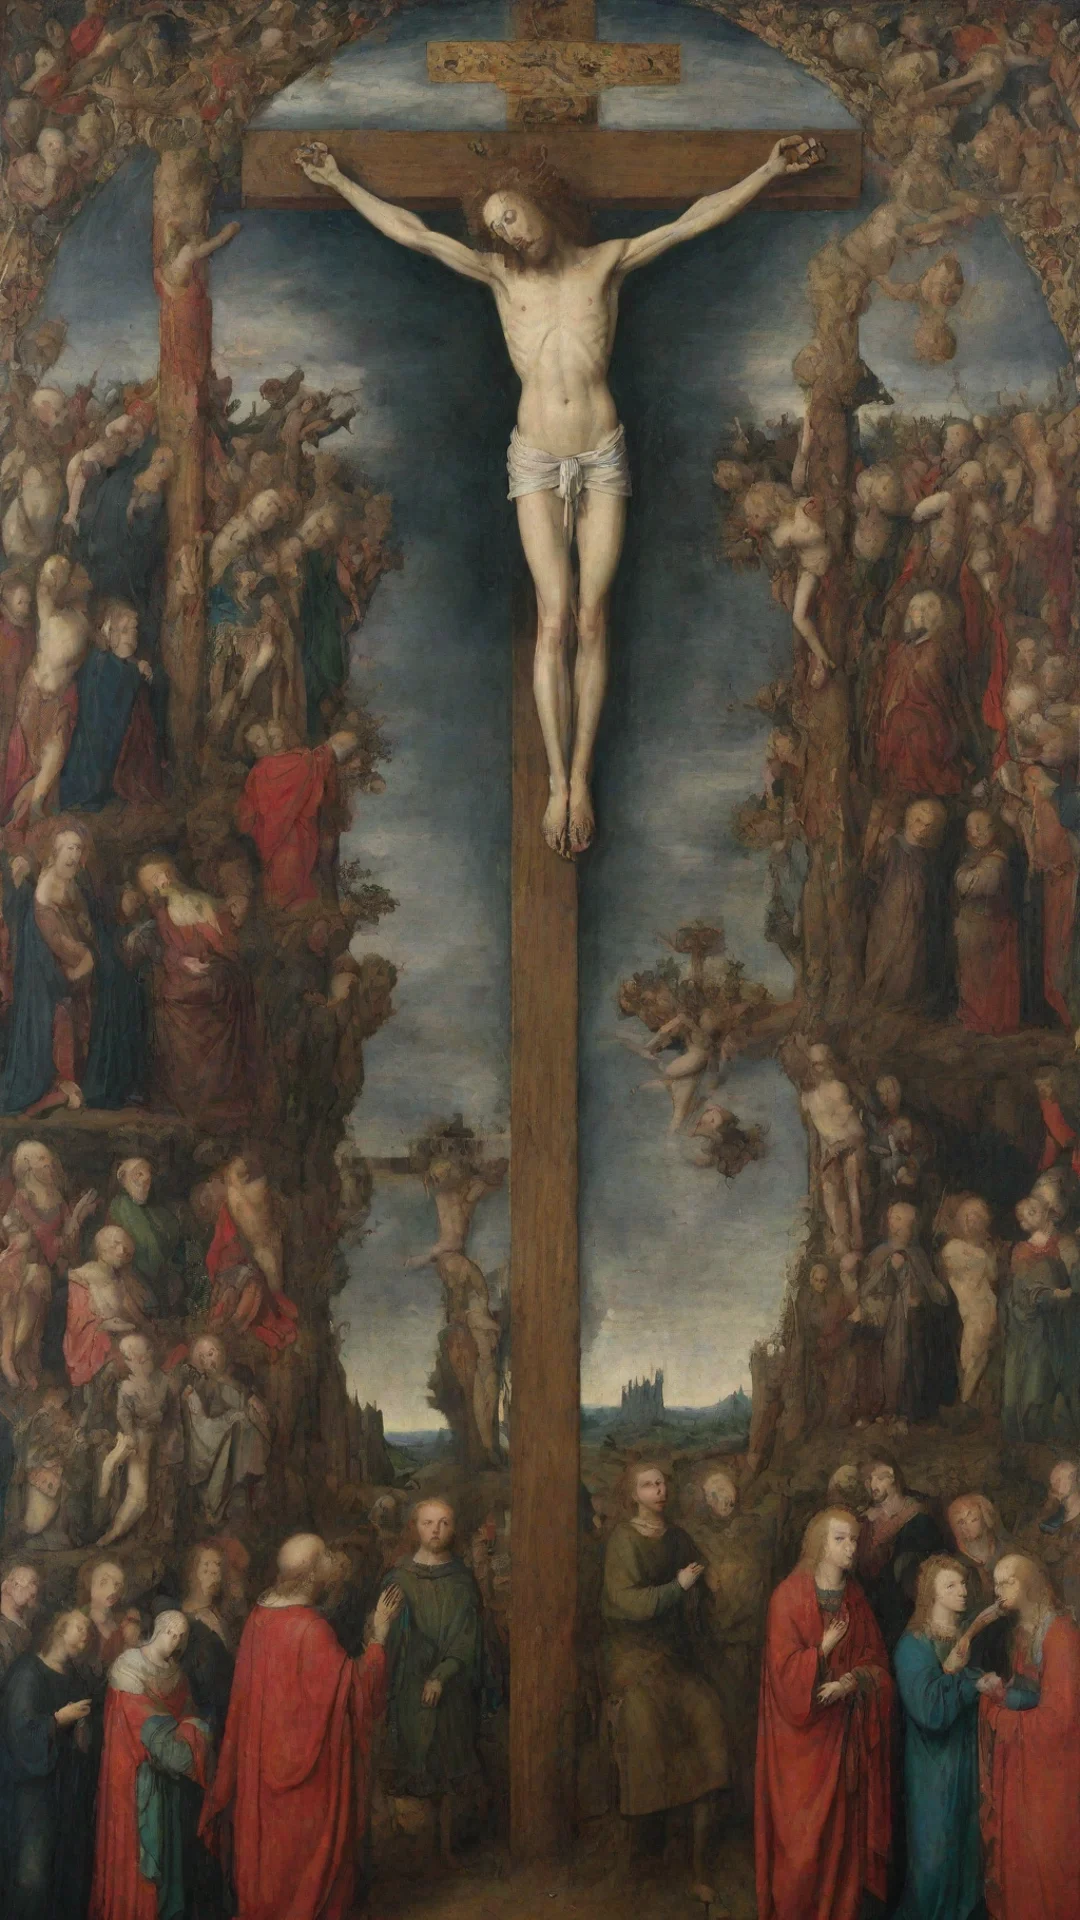 aiartstation art crucifixion and last judgement by jan van eyck confident engaging wow 3 tall